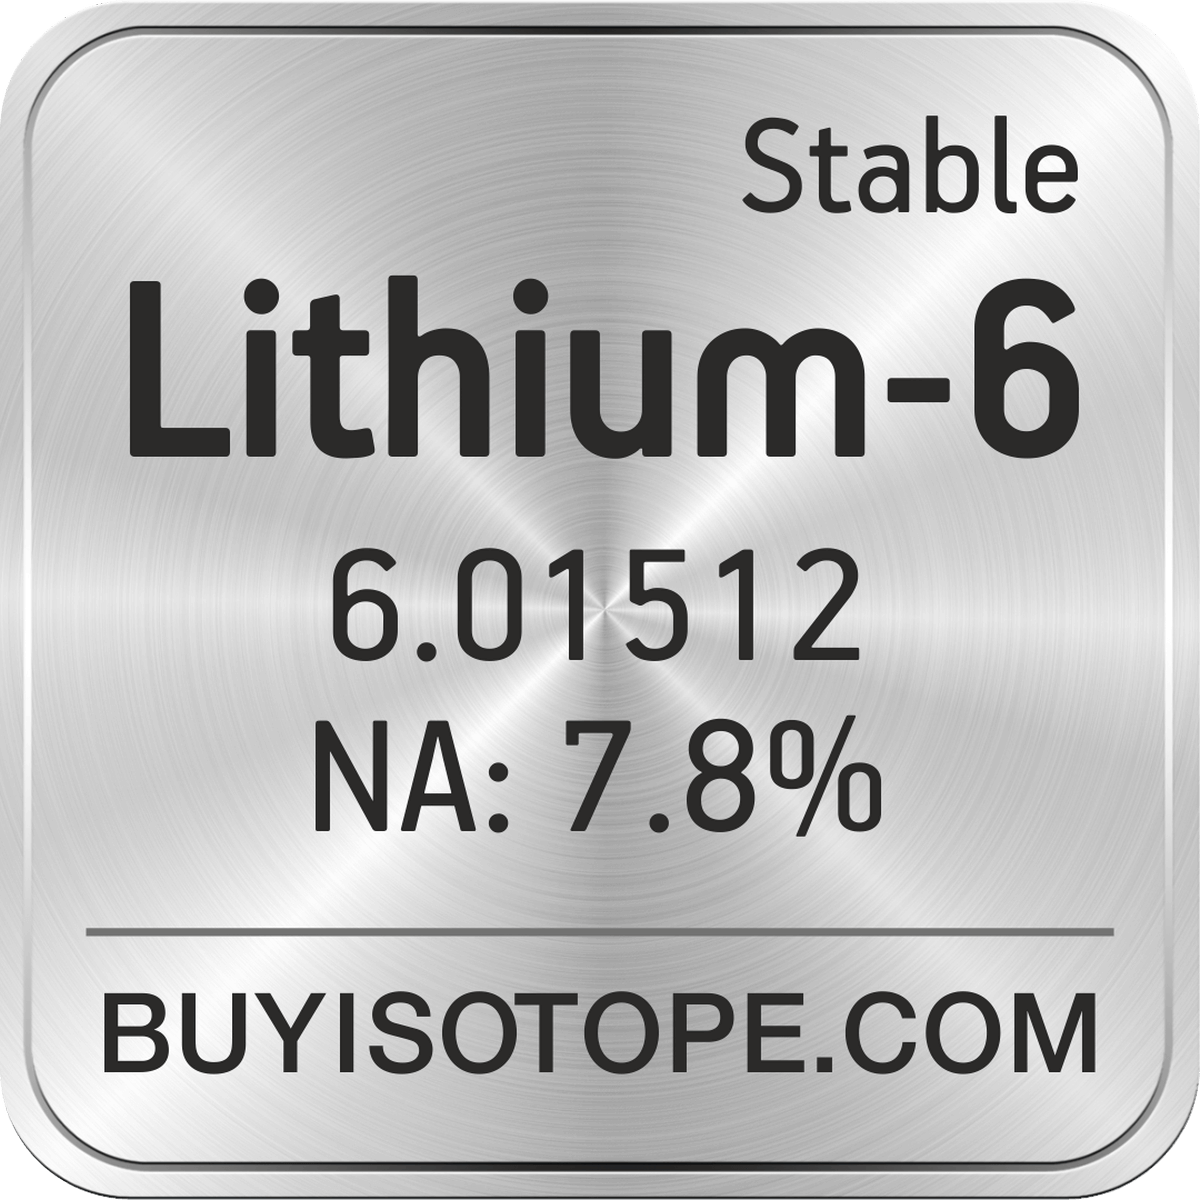 https://www.buyisotope.com/isotope-images/lithium-6-isotope-lithium-6-enriched-lithium-6-abundance-lithium-6-buy-lithium-6-supplier-lithium-6-atomic-mass-lithium-6-1200.png